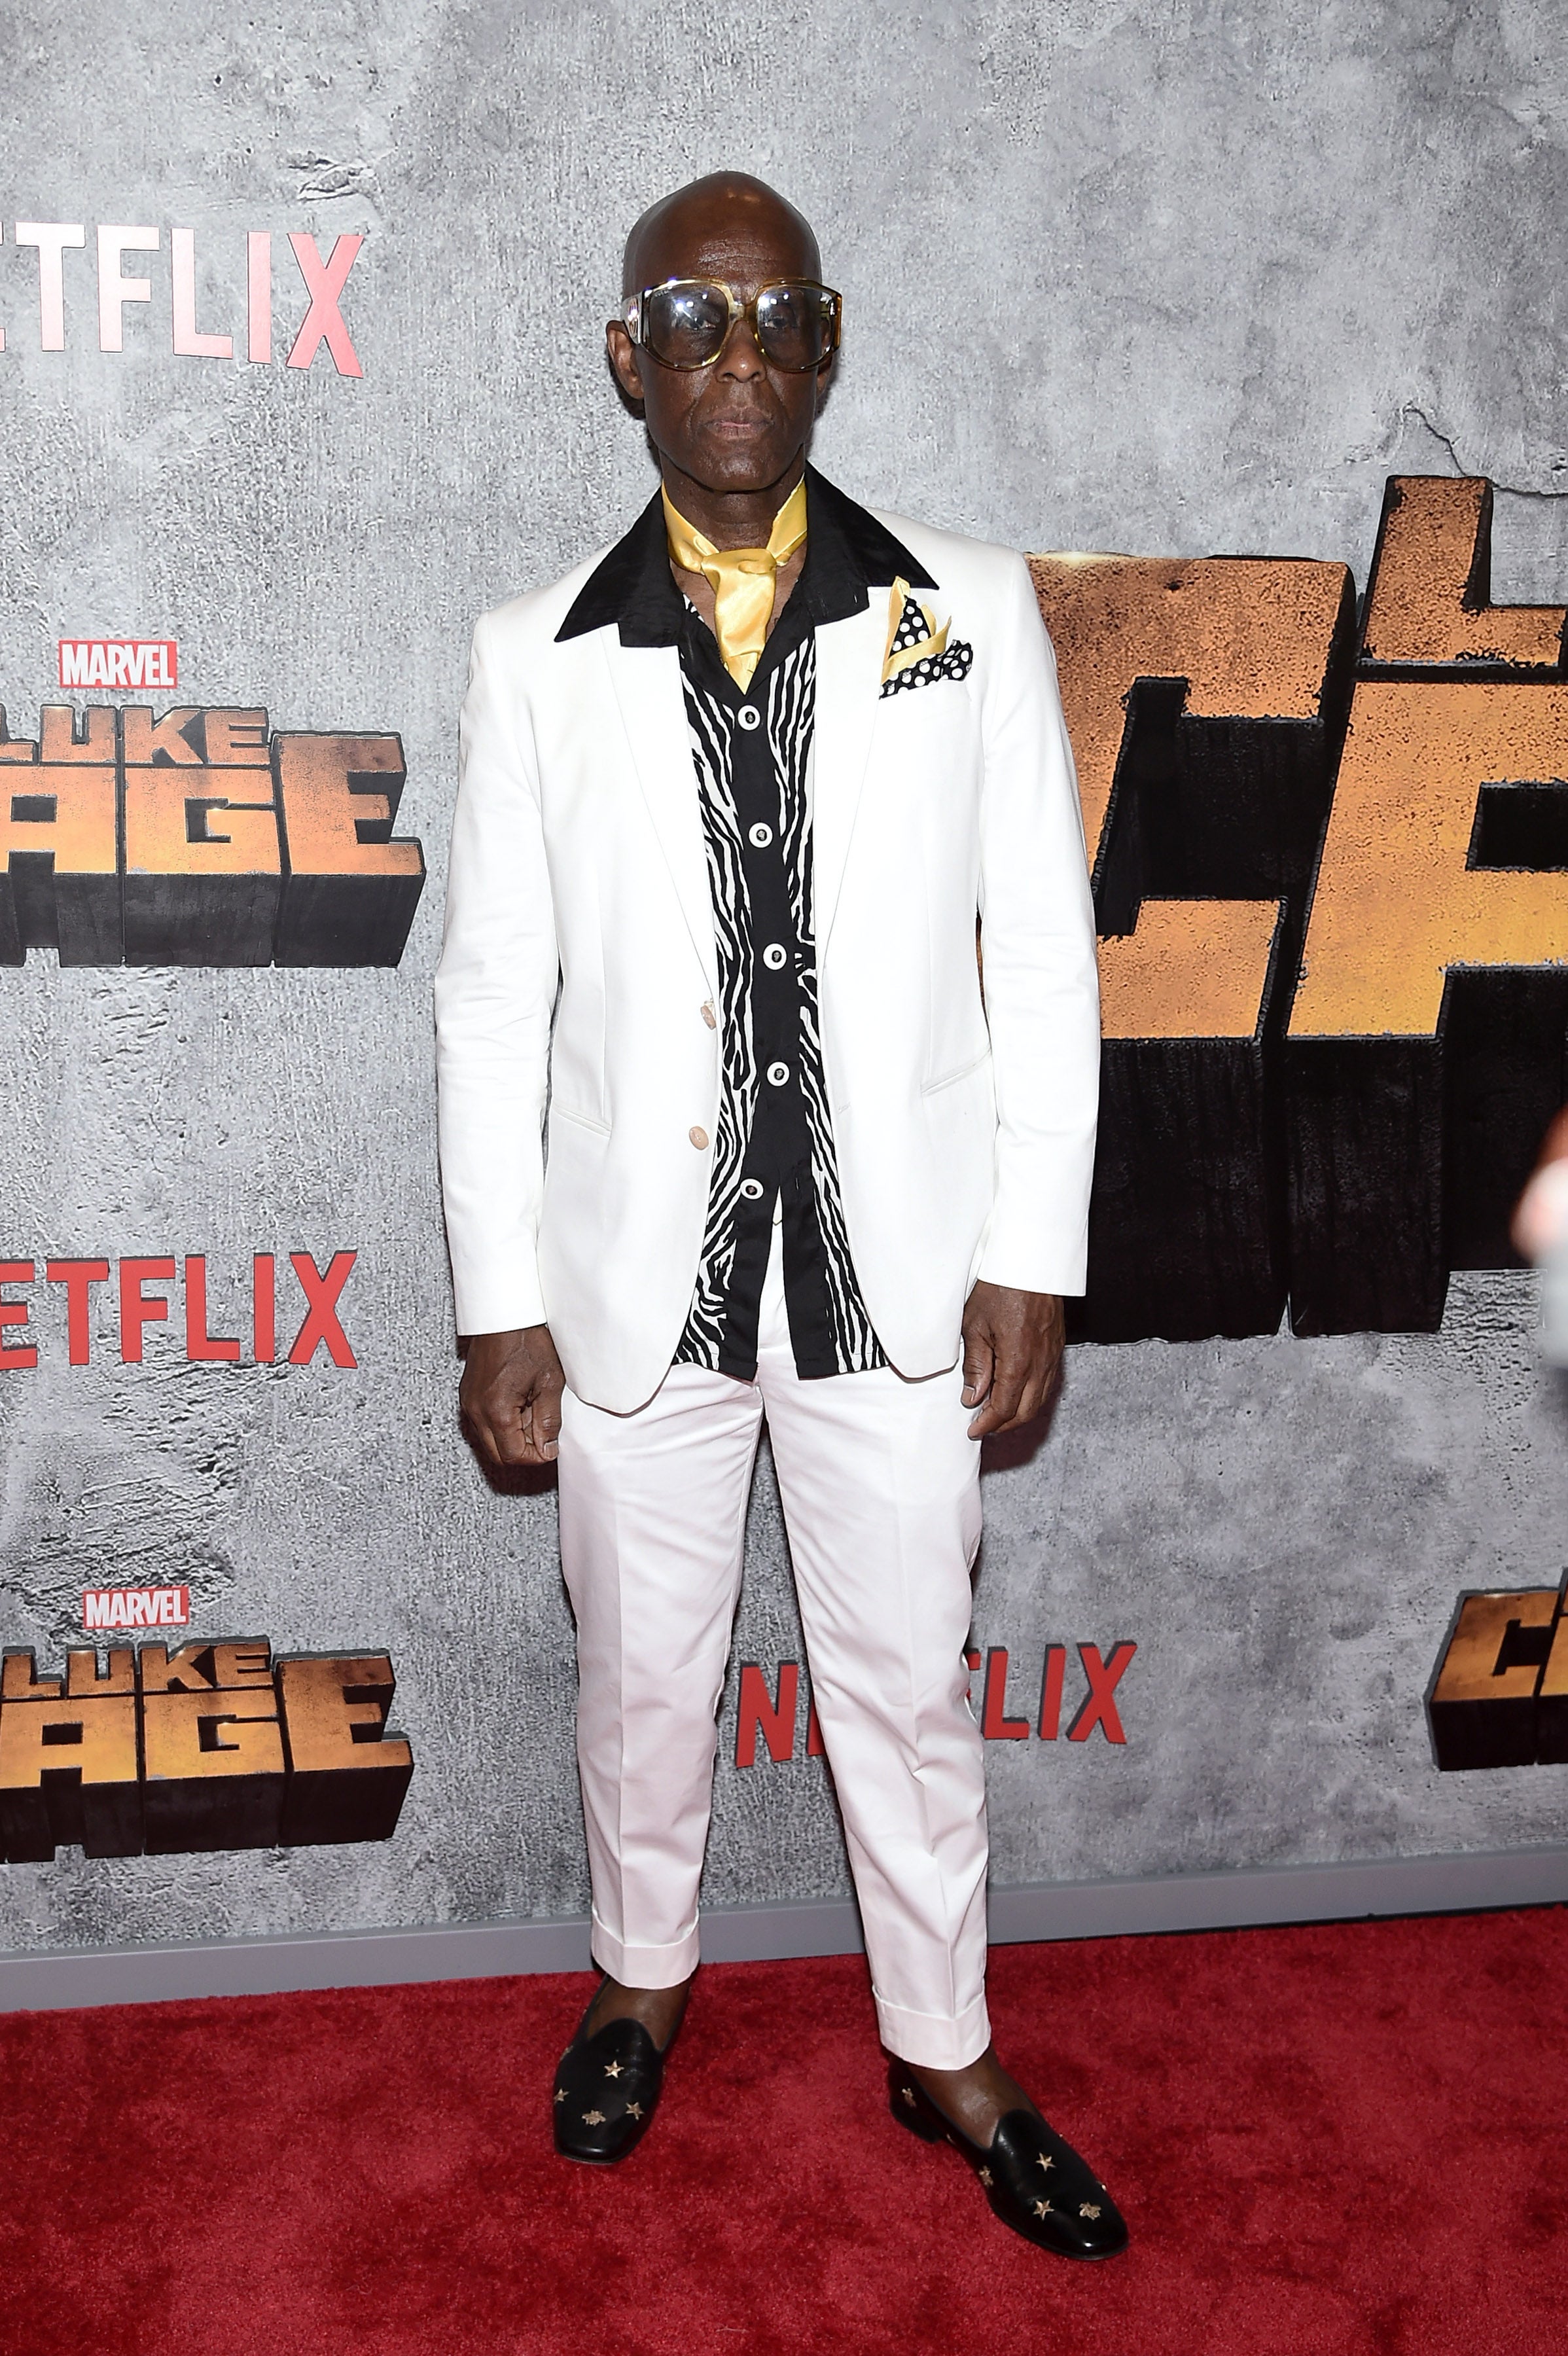 Black Excellence Shined At The Premiere of 'Luke Cage' Season 2 In New York City
